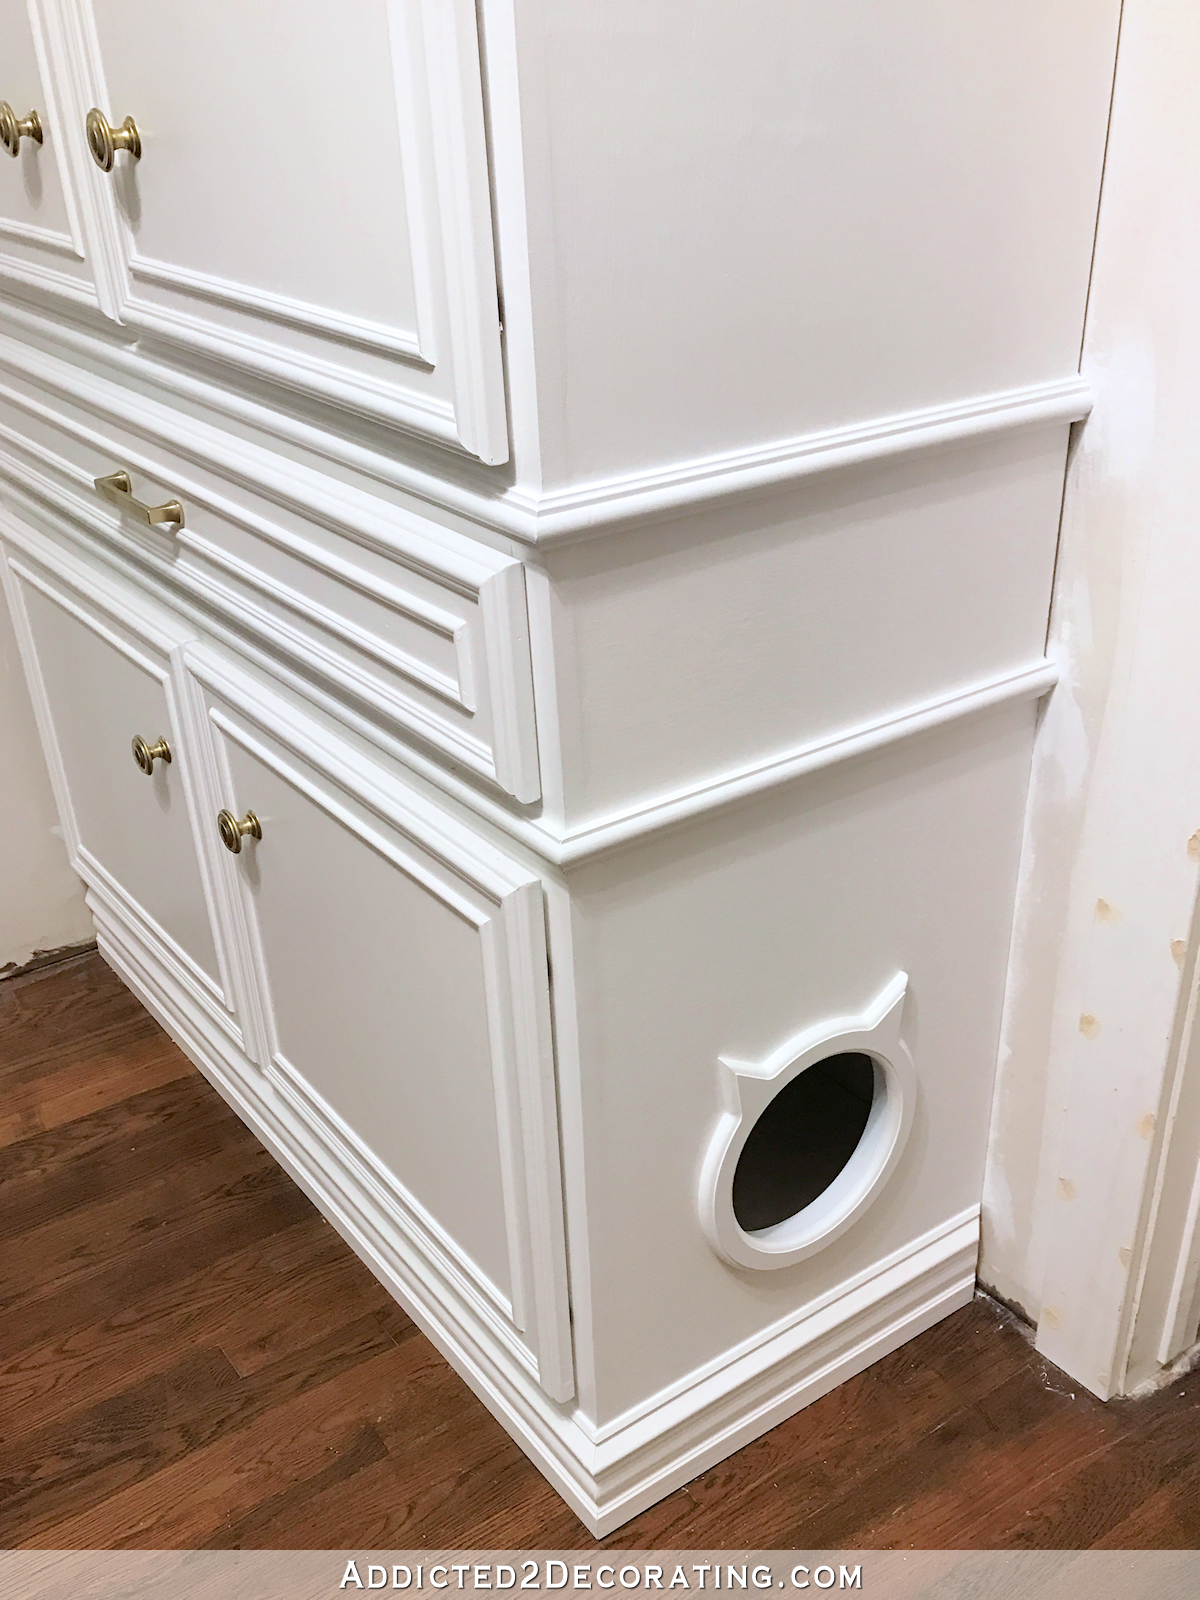 finished hallway cabinets - side of cabinet with cat door entrance to litter box